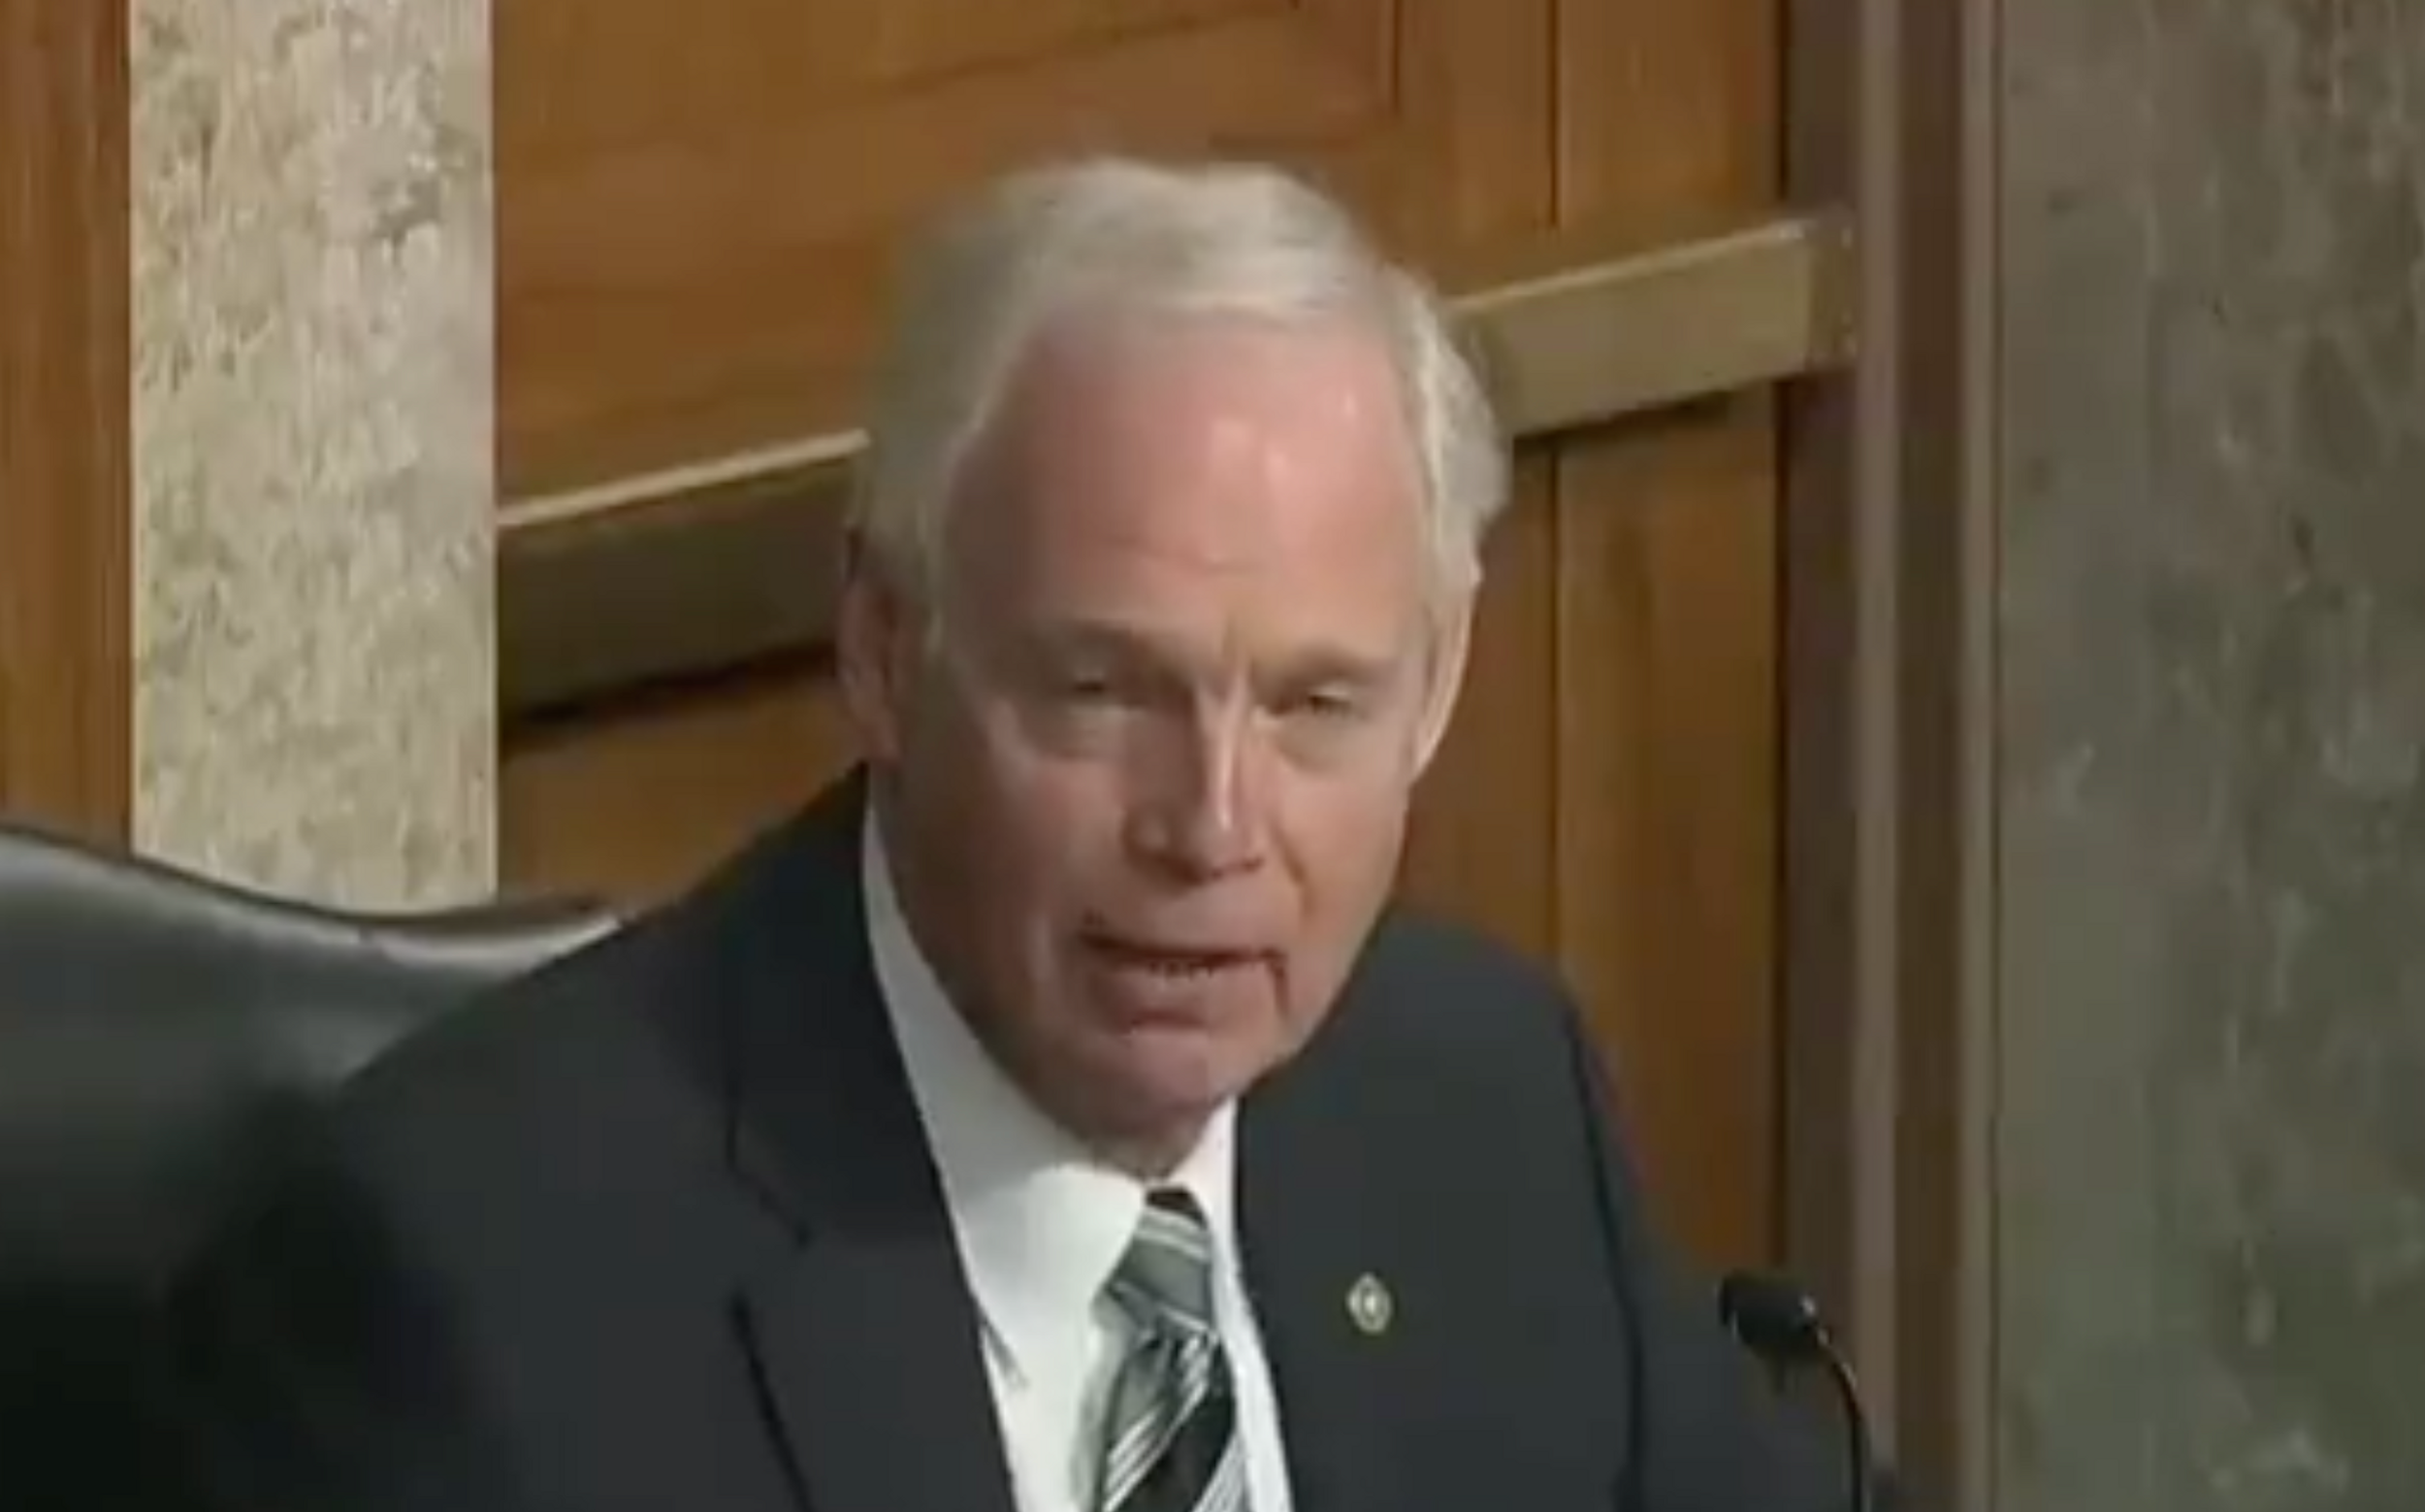 Pro-Trump Senator Spreads Disinformation About the Capitol Riots During Senate Hearing on January 6th Siege